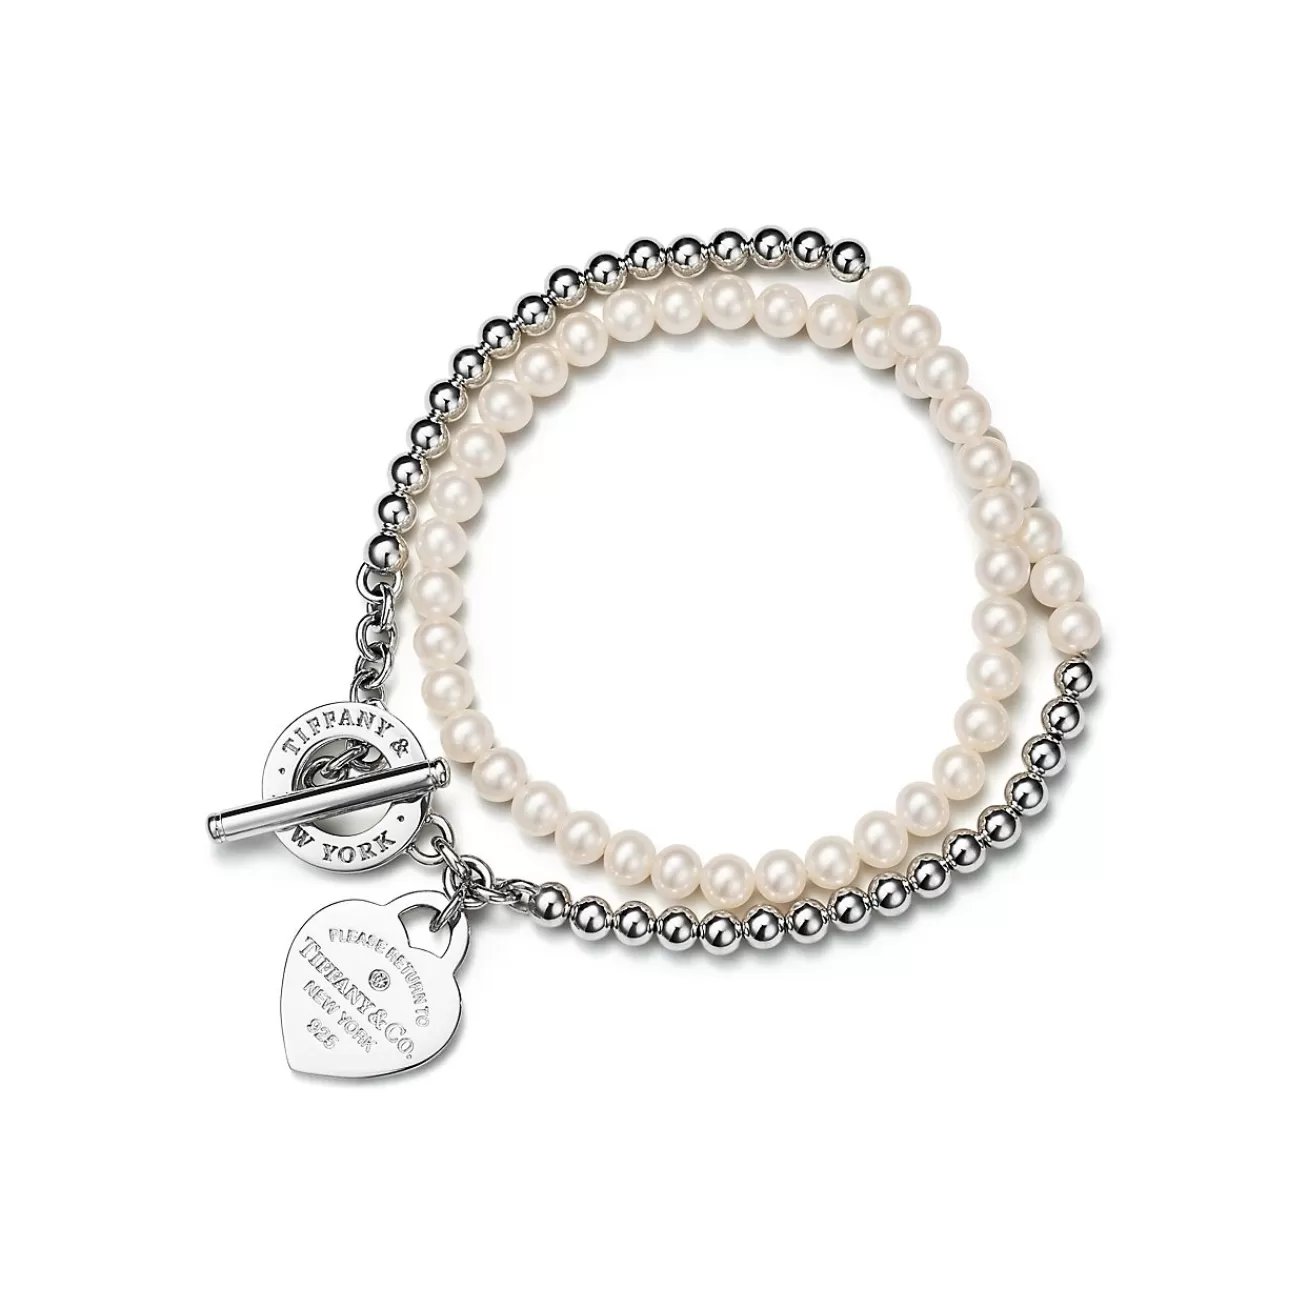 Tiffany & Co. Return to Tiffany® Wrap Bead Bracelet in Silver with Pearls and a Diamond, Small | ^ Bracelets | Gifts for Her